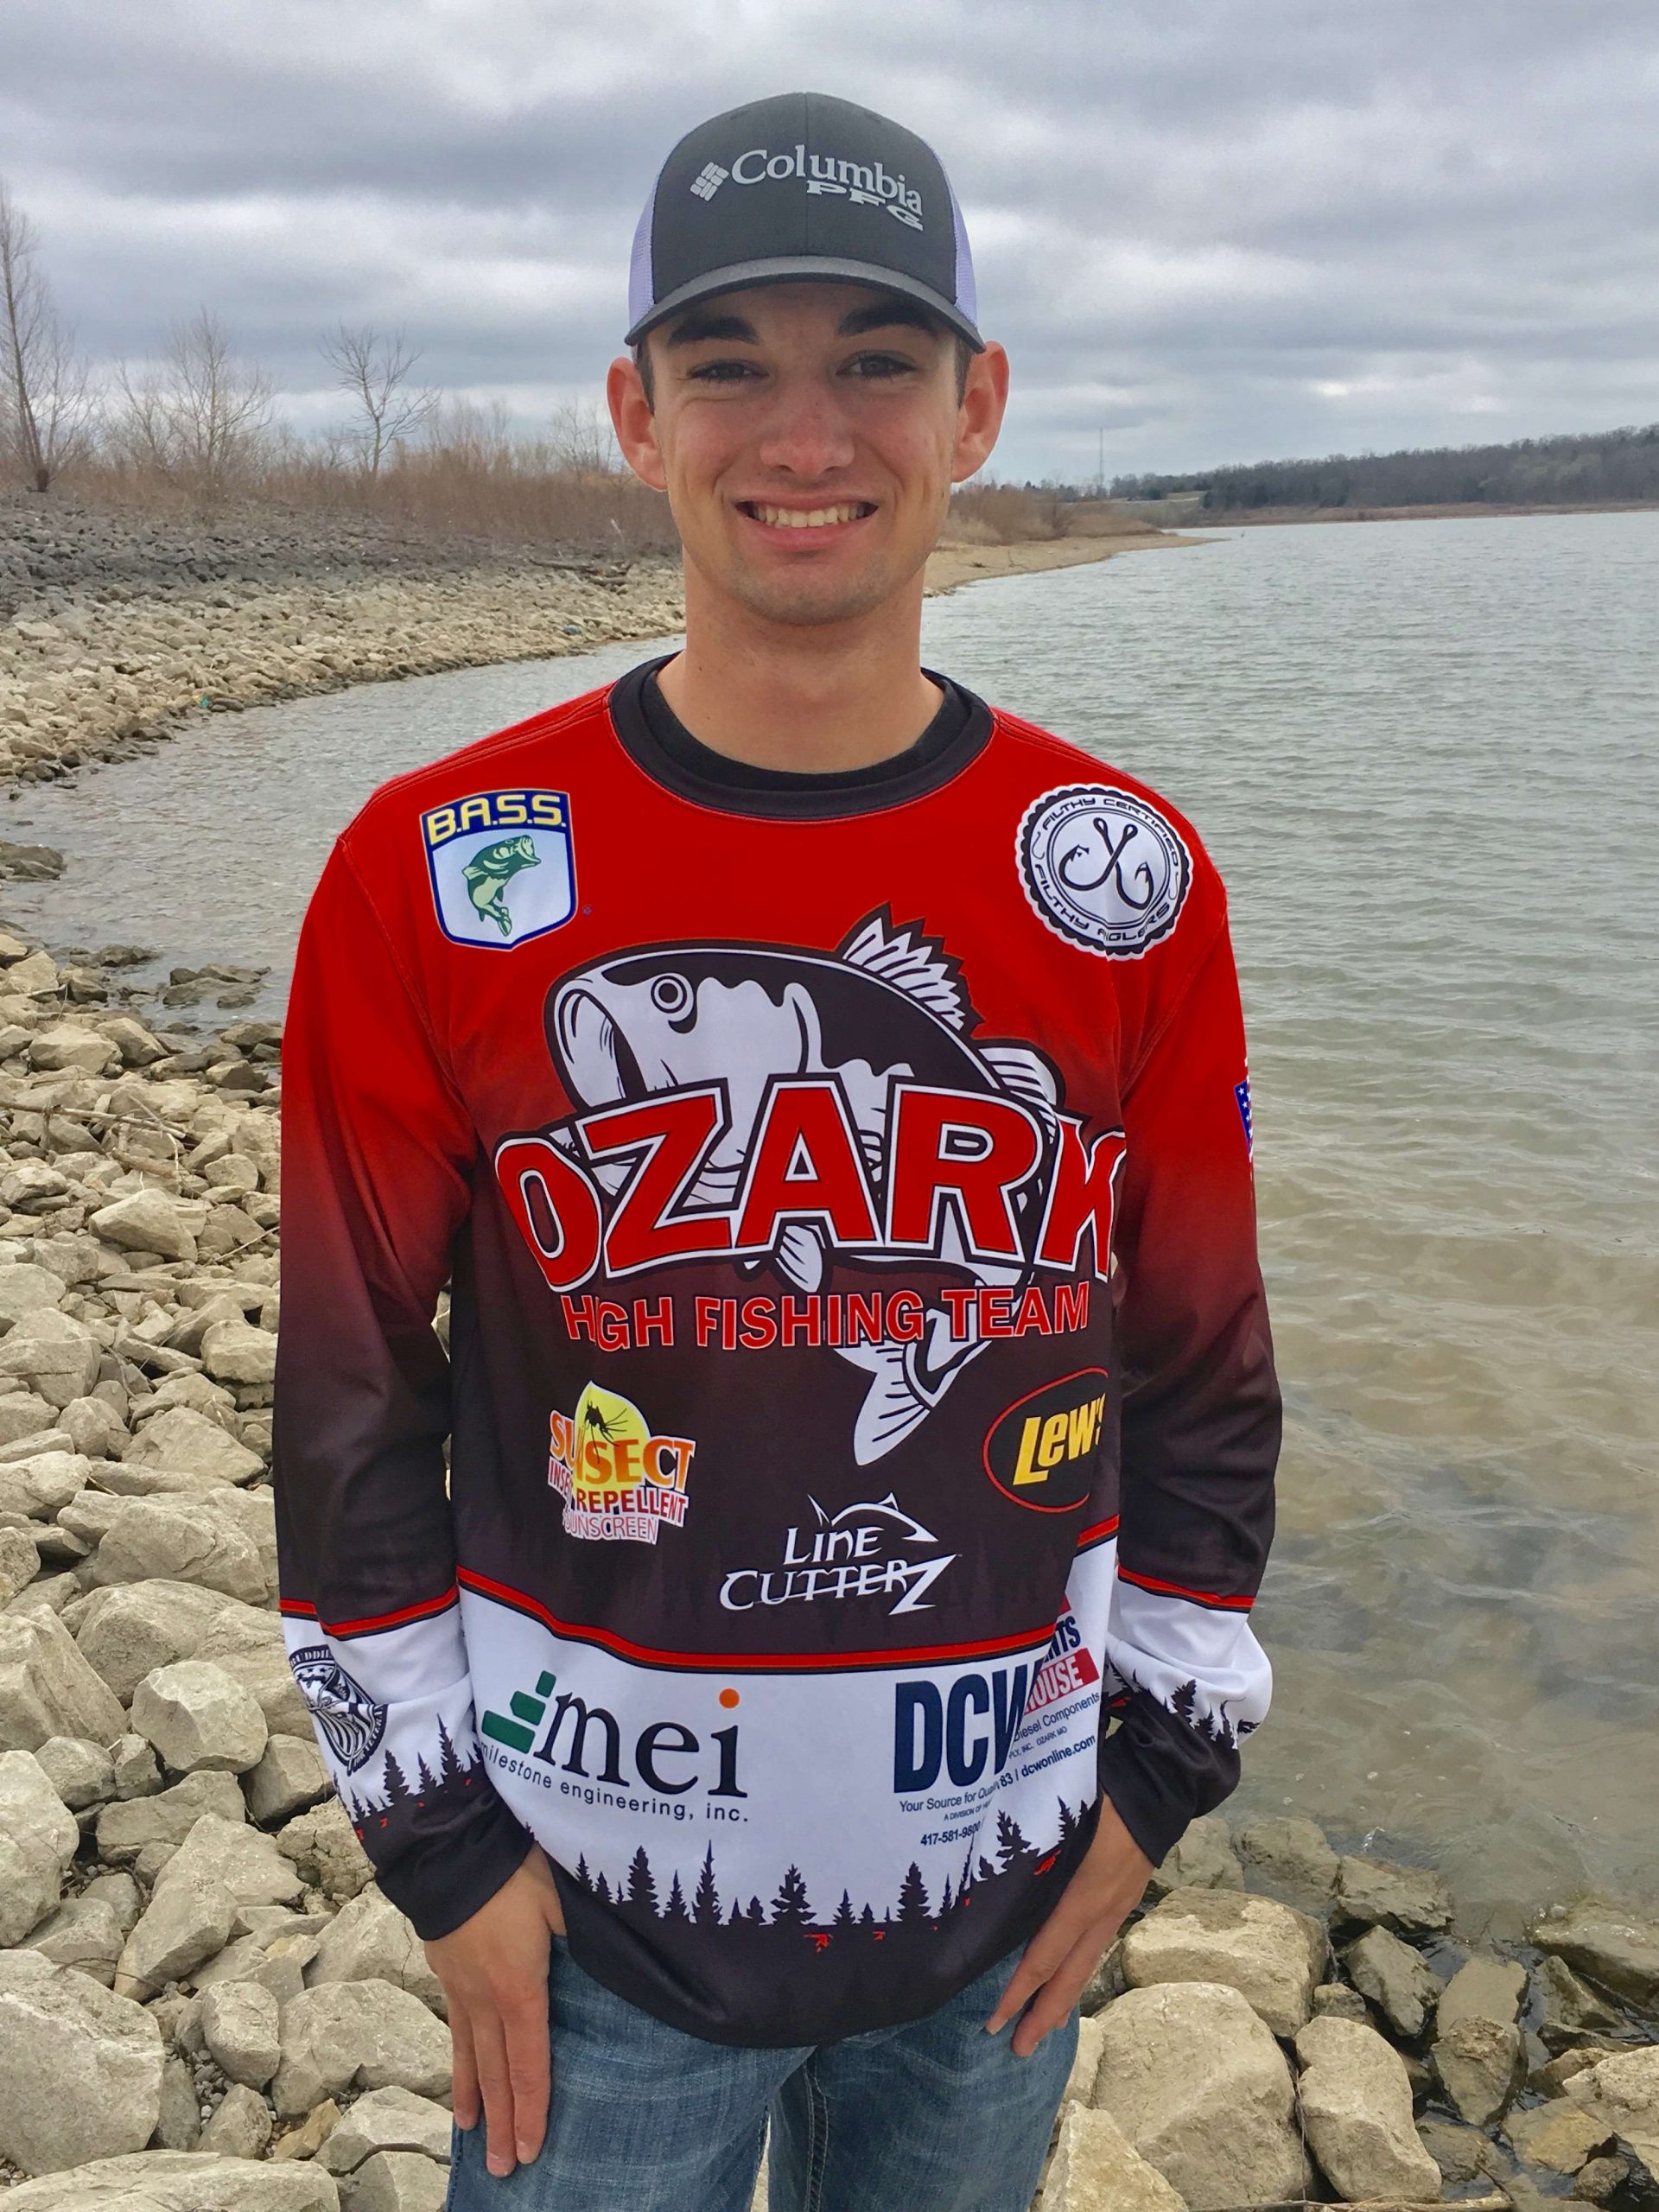 <b>Dalton Combs, Ozark, Mo.</b><br>
A junior at Ozark High School, Combs has earned seven Top 20 finishes, including a win in a Southwest Missouri High School High School Fishing Association event on Table Rock Lake. Combs fishes events with his sister, Keeley, and the team had the highest points and total weight caught over three qualifying events with more than 170 other teams. 
<p>
âDalton has placed in nearly every tournament that he has participated in, and he and his partner were crowned the very first Missouri State champions in the Missouri Teen Angler Tournament Series,â wrote Jeremy Sisco, Ozark High School fishing coach.
<p>

In addition to his tournament success, Combs helps with the Fishing for Dreams organization, which gives children with disabilities an opportunity to get out on the water. Combs believes in keeping the lake environment as clean as possible. He has organized shoreline trash pickups on Table Rock Lake, as well as taught other anglers about the importance of maintain a clean, Zebra mussel-free boat.
